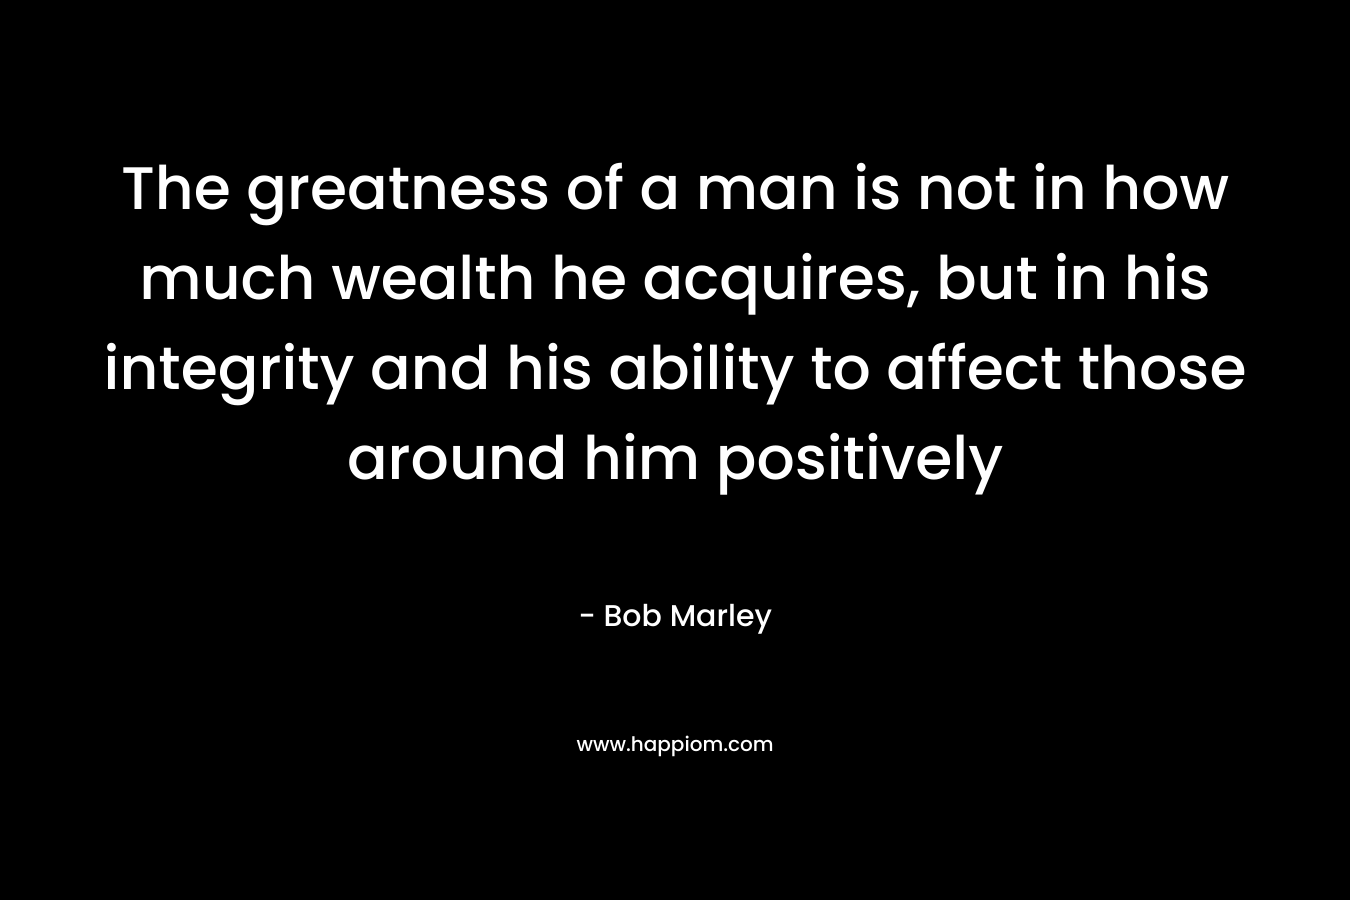 The greatness of a man is not in how much wealth he acquires, but in his integrity and his ability to affect those around him positively – Bob Marley